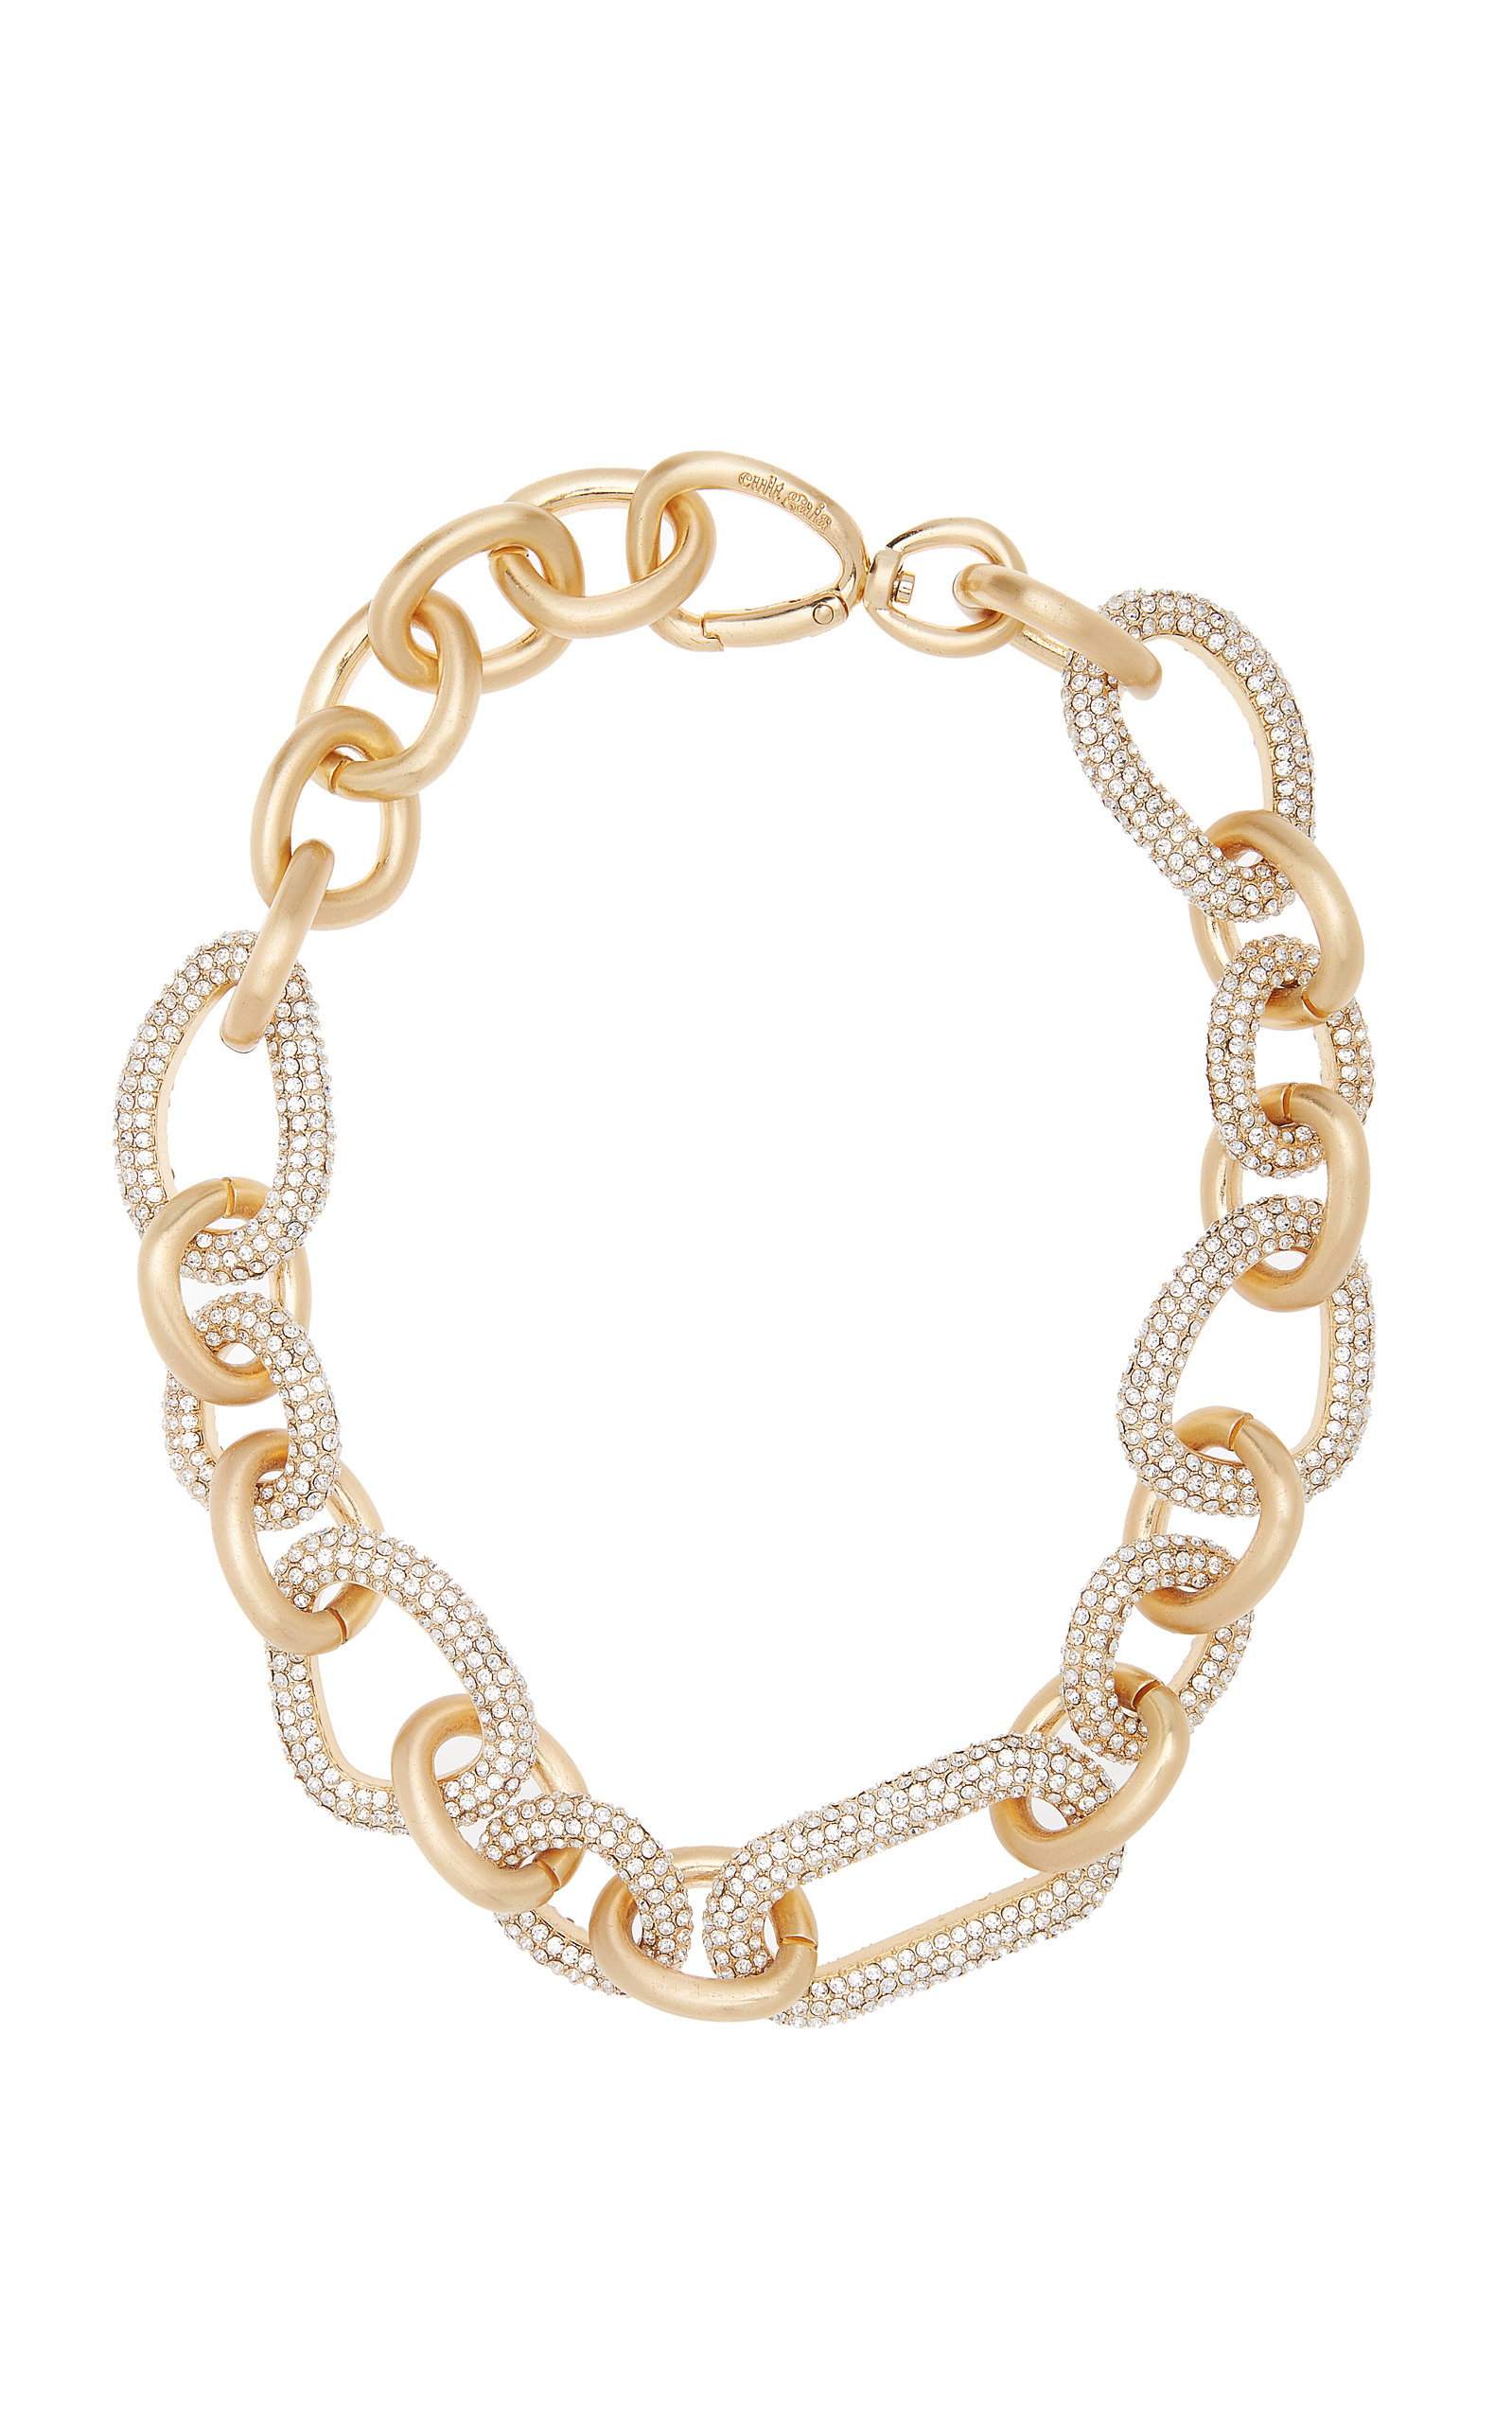 Cult Gaia - Women's Reyes Gold-Tone Necklace - Gold - Moda Operandi - Gifts For Her